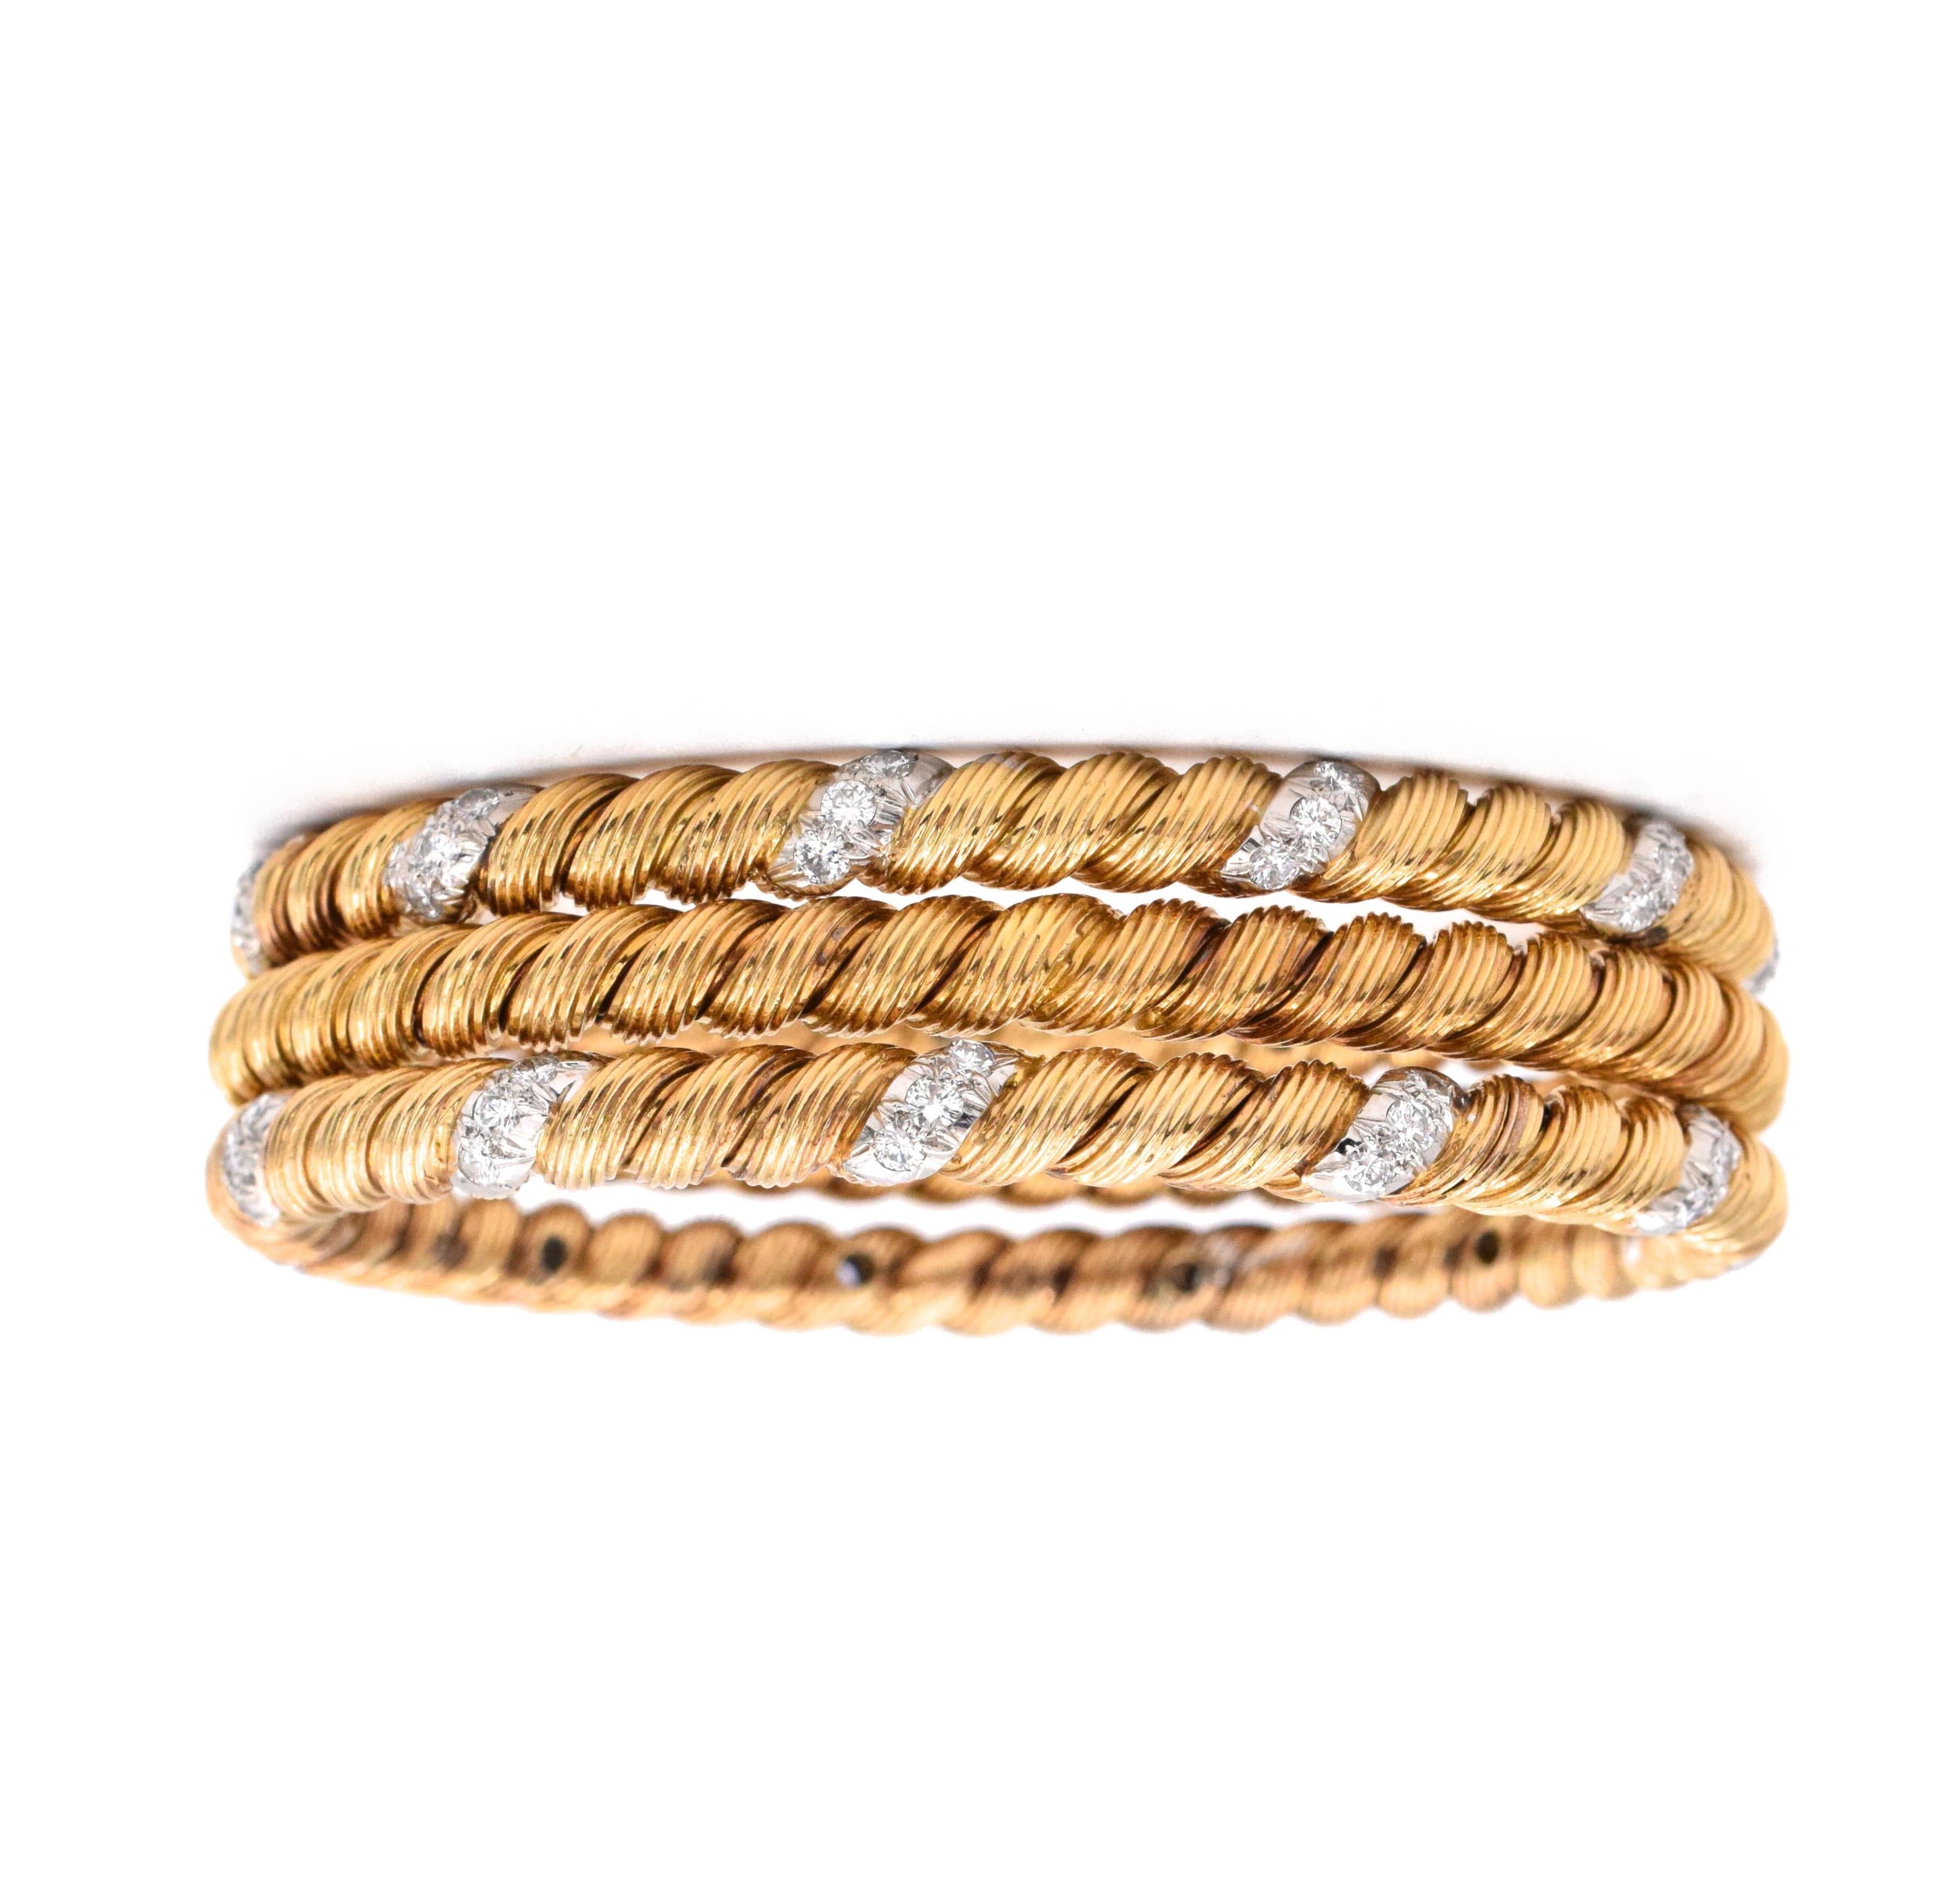 Beautiful twisted style Gold and Diamond Bangles by 
Van Cleef and Arpels. Two  bangles with diamonds & one plain. gold.
 18k yellow gold. 
Signed VCA, FRANCE. 
Size: Medium - Inner diameter is 2.5 inches Inner circumference is 7 inches